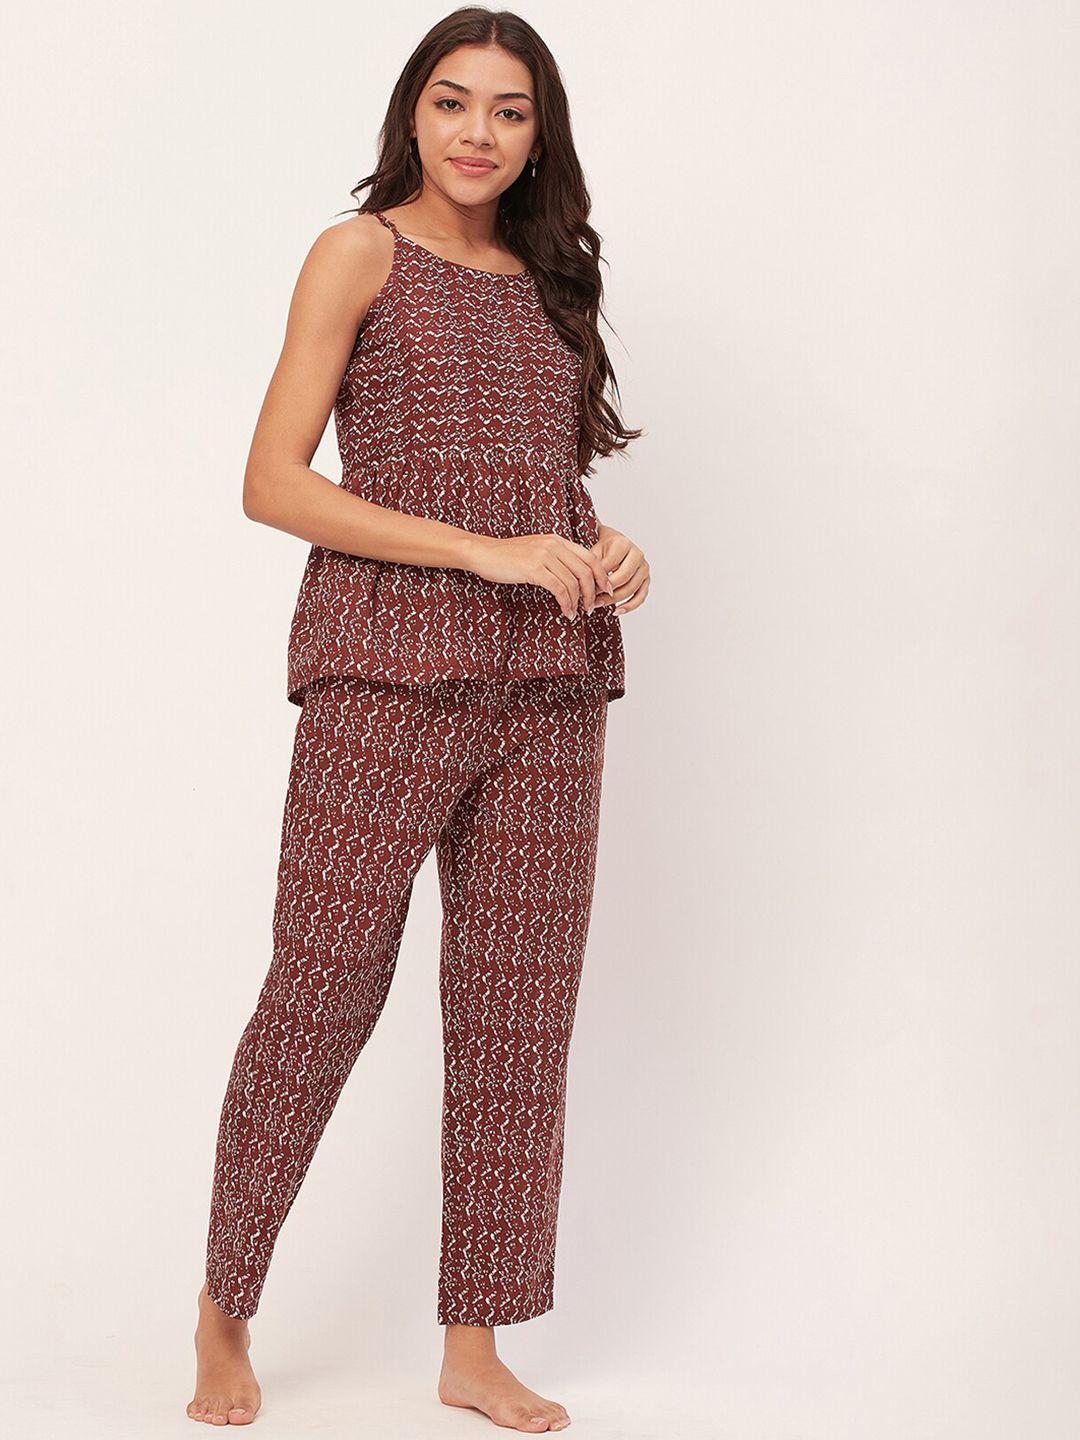 moomaya abstract printed shoulder straps pure cotton night suit